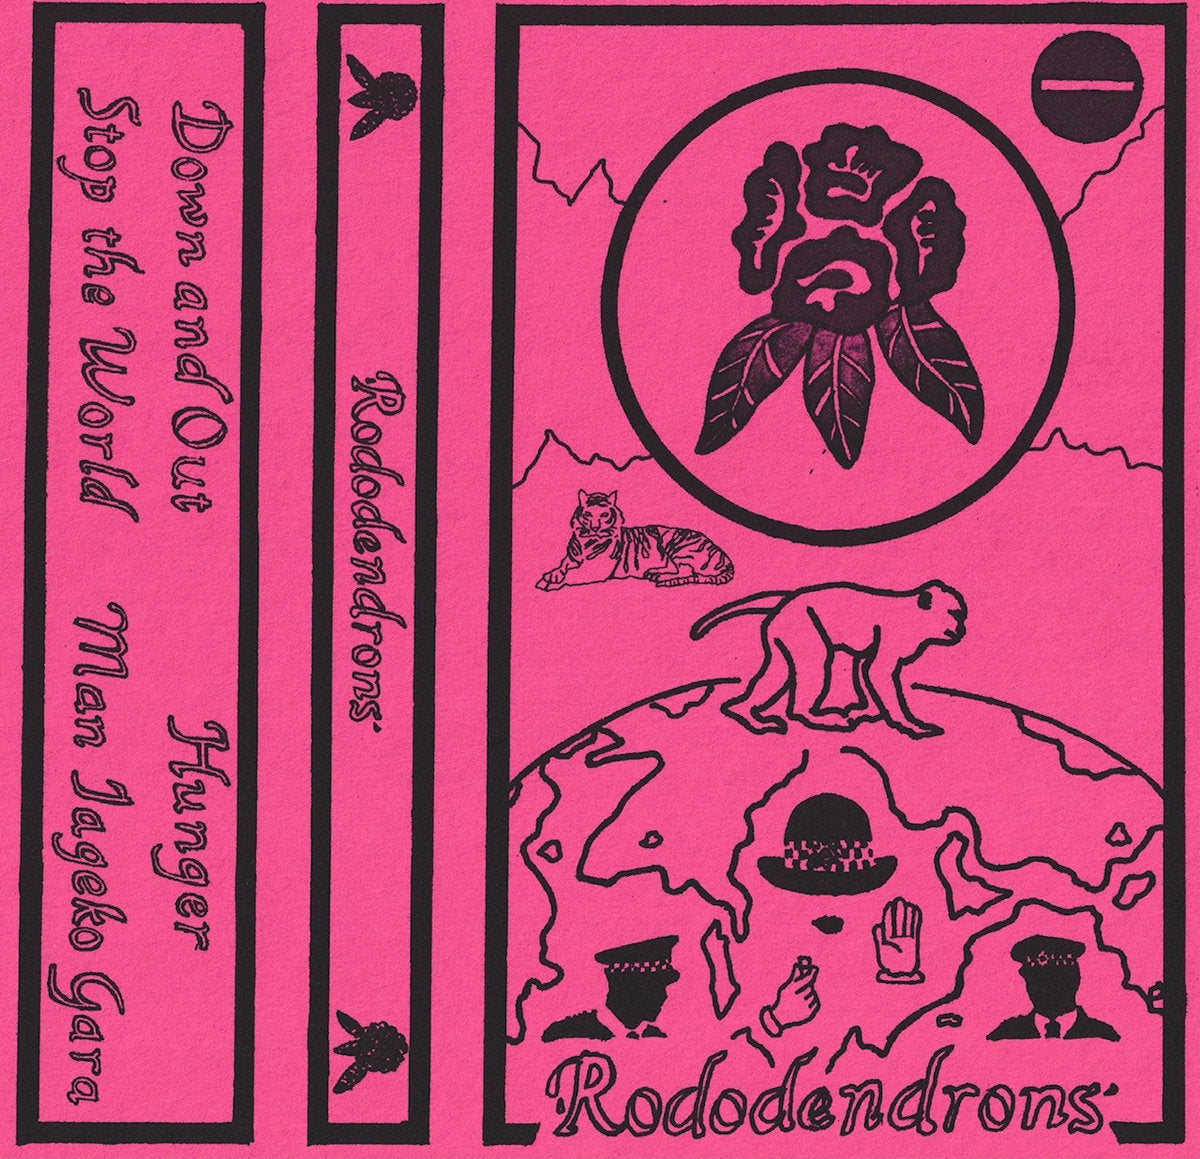 RODODENDRONS - "DEMO" CS